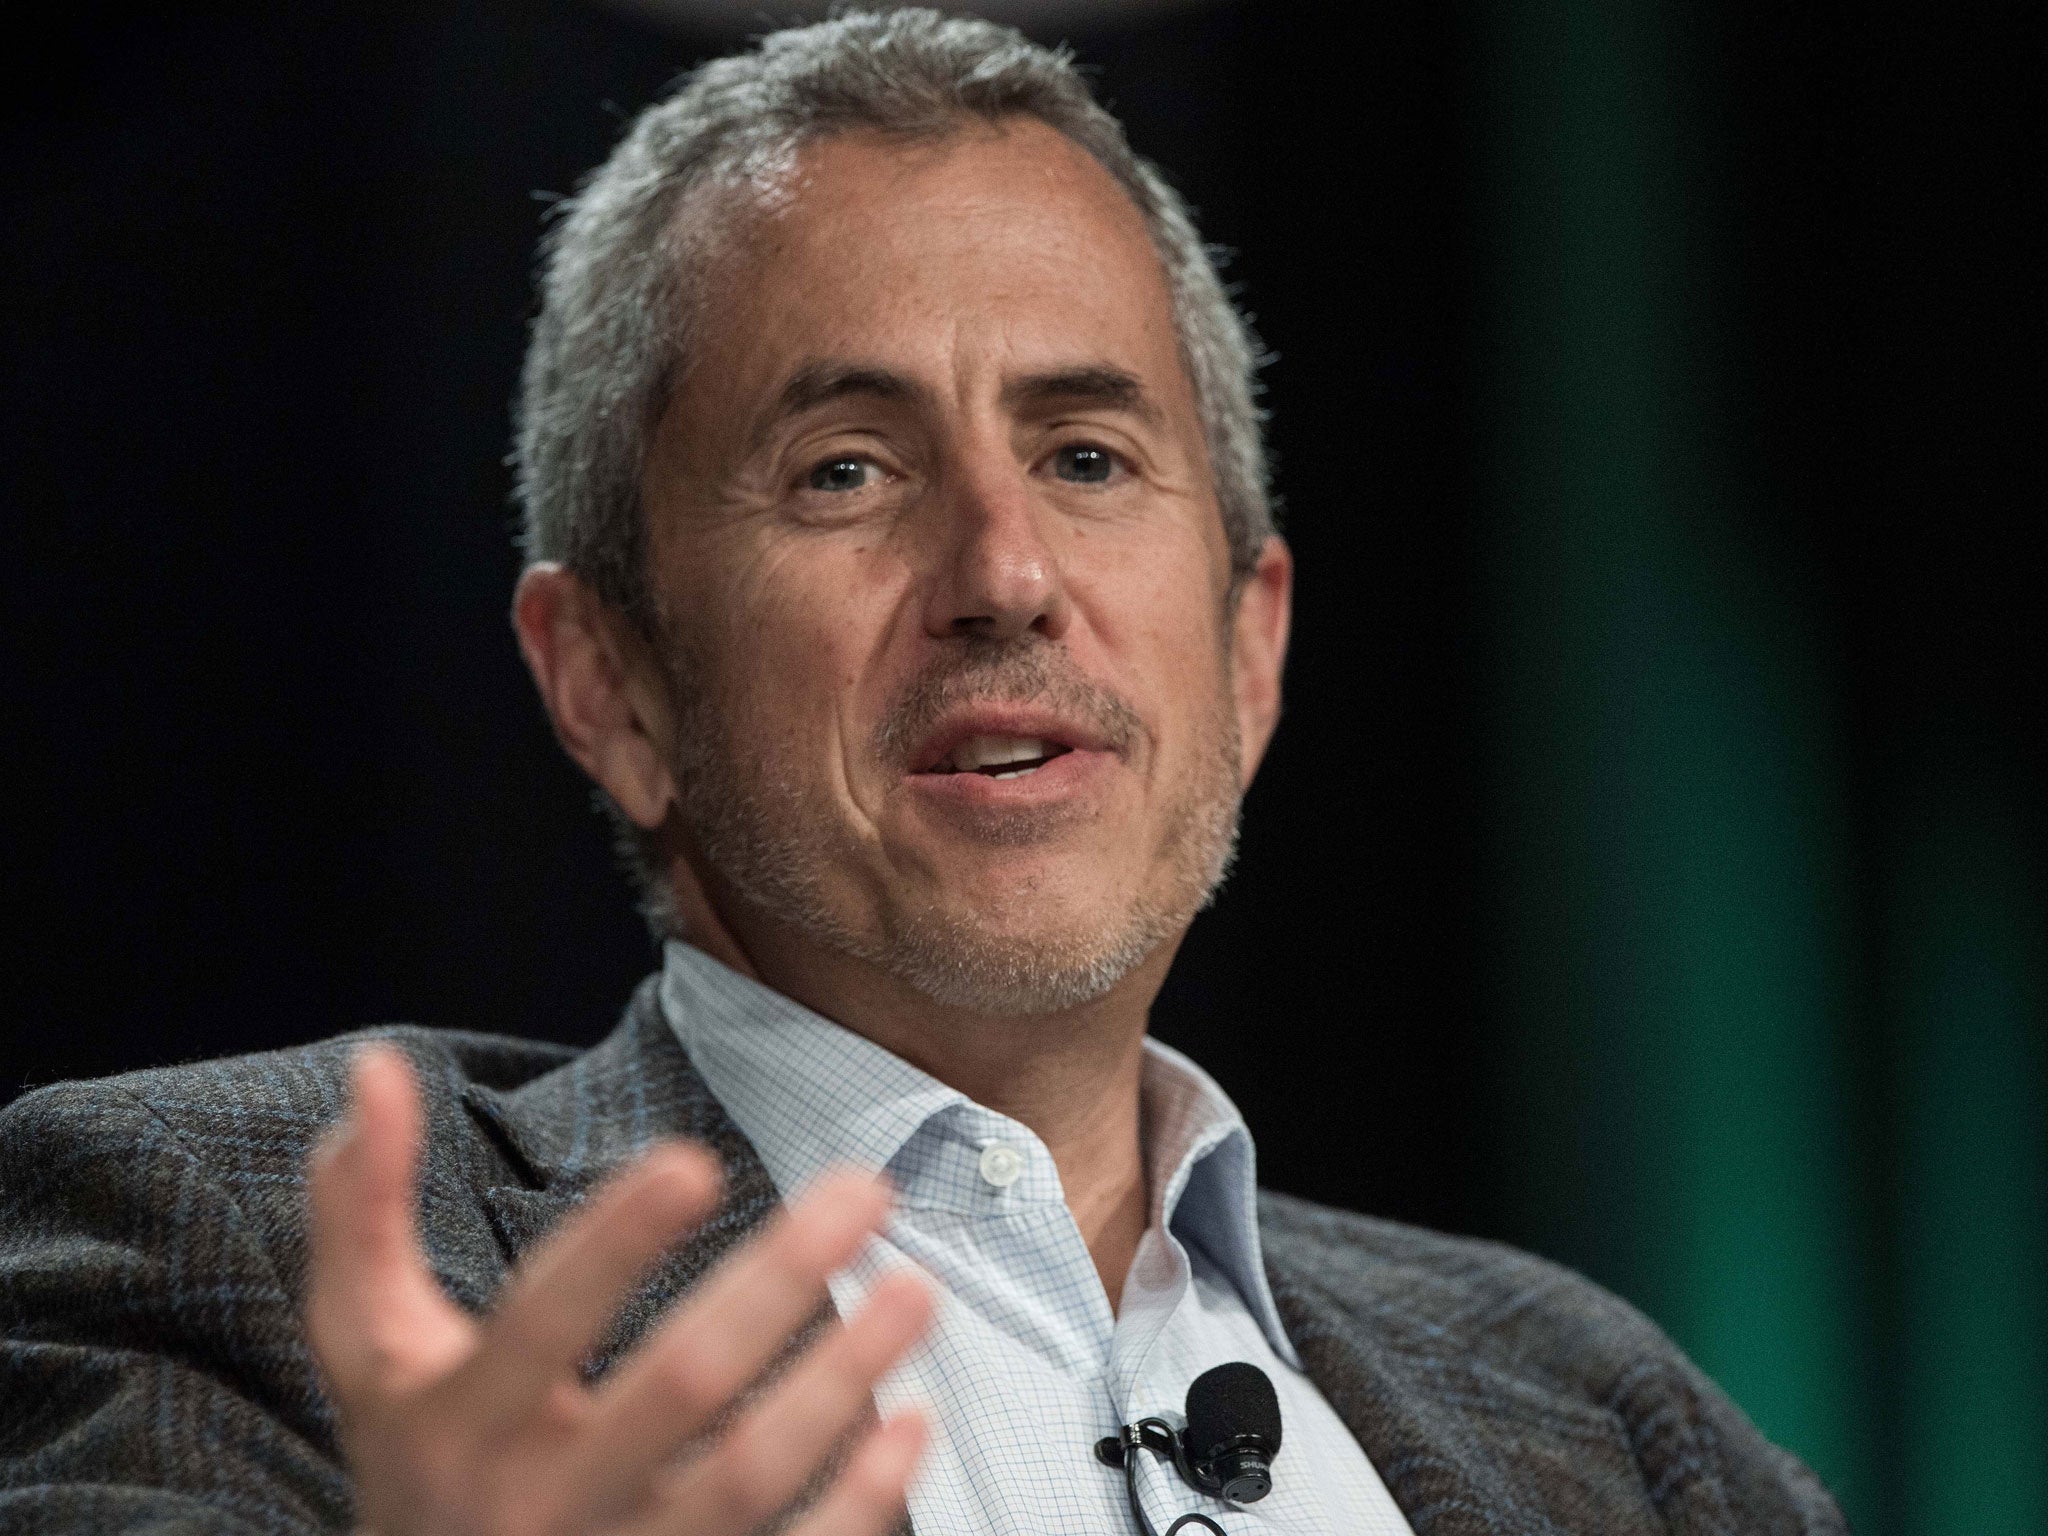 Danny Meyer is eliminating tipping at his Union Square Hospitality restaurants